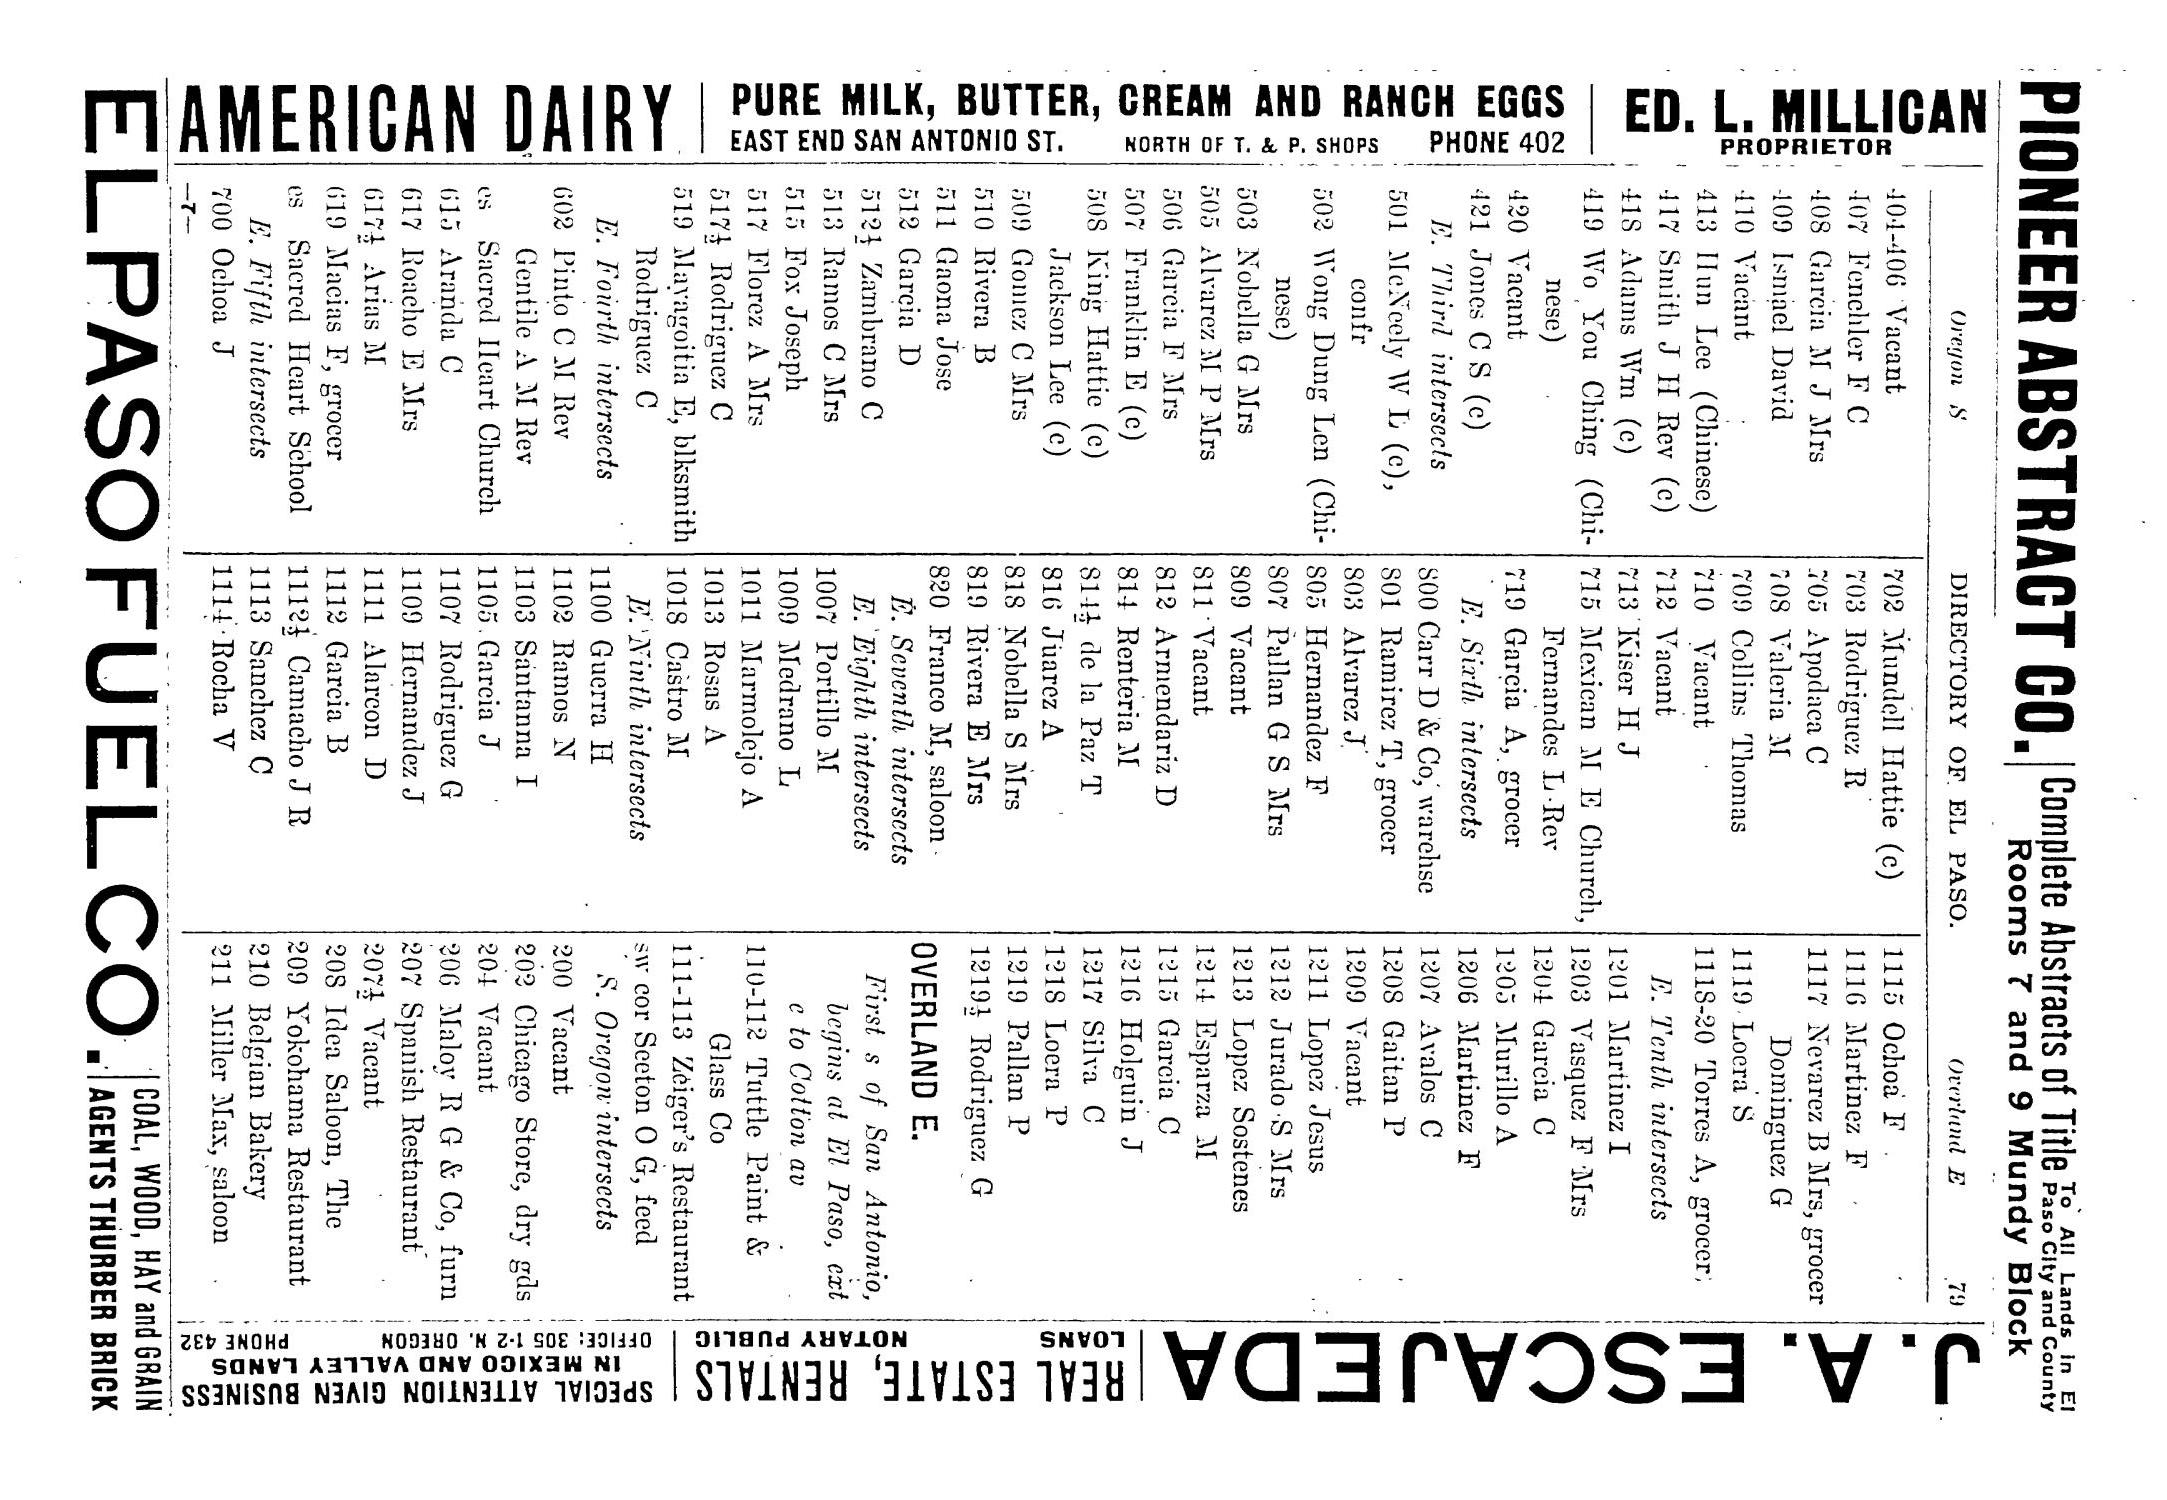 John F. Worley & Co.'s El Paso Directory for 1906
                                                
                                                    79
                                                